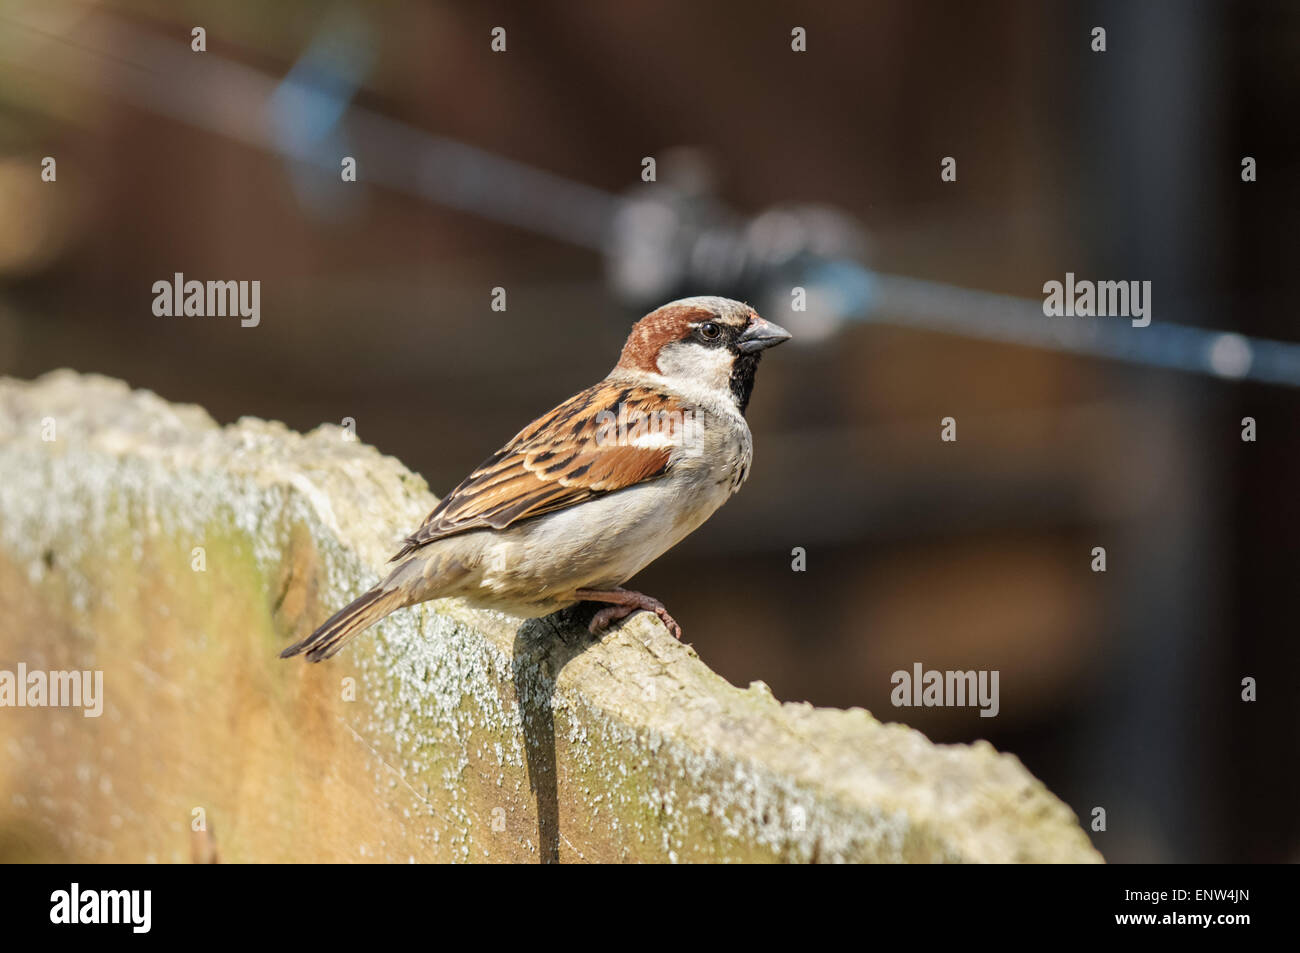 Sparrow perching on wooden fence Banque D'Images